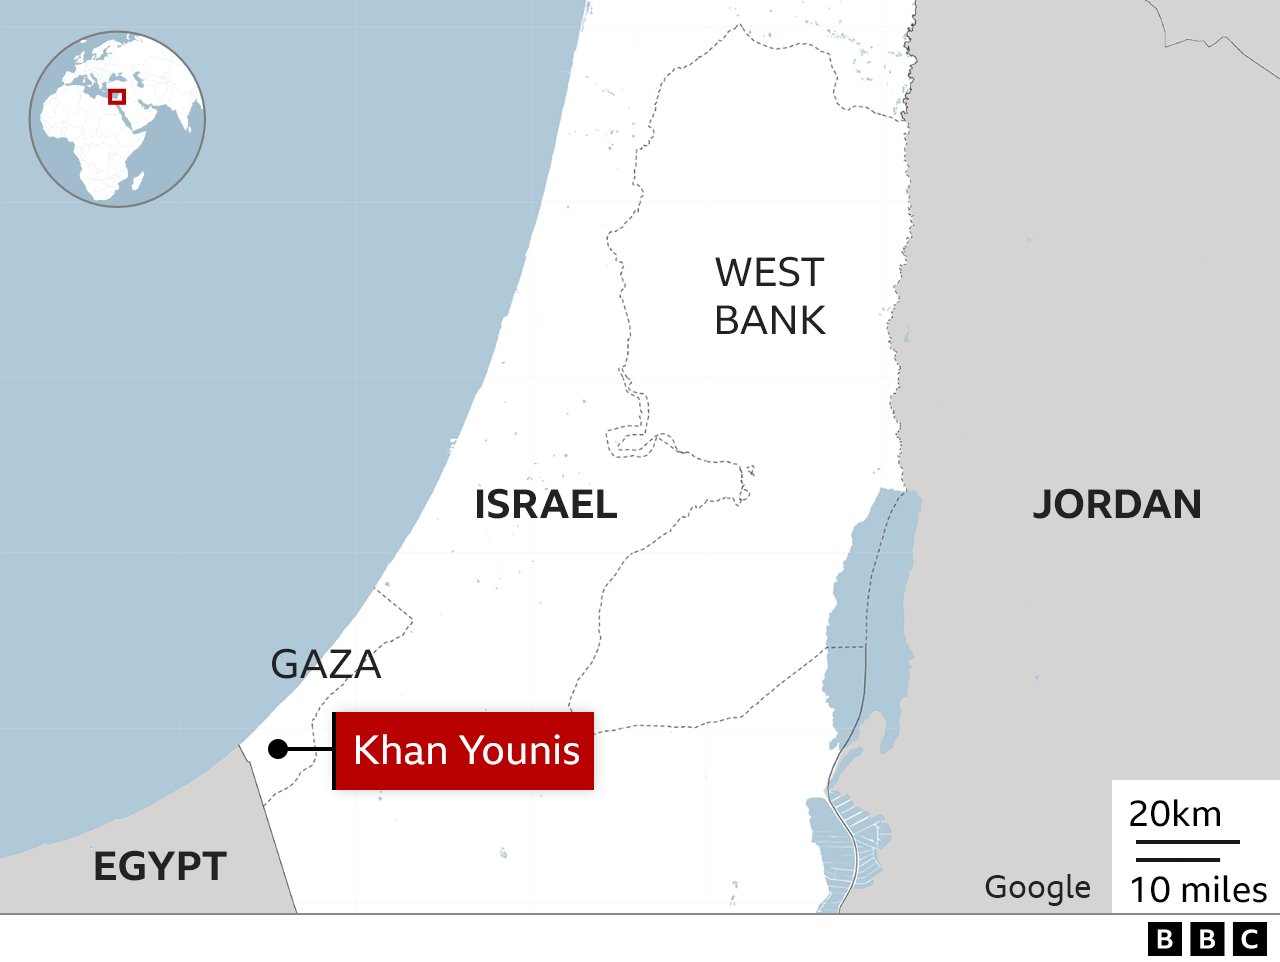 Map showing Israel and highlighting Khan Younis in Gaza and the West Bank